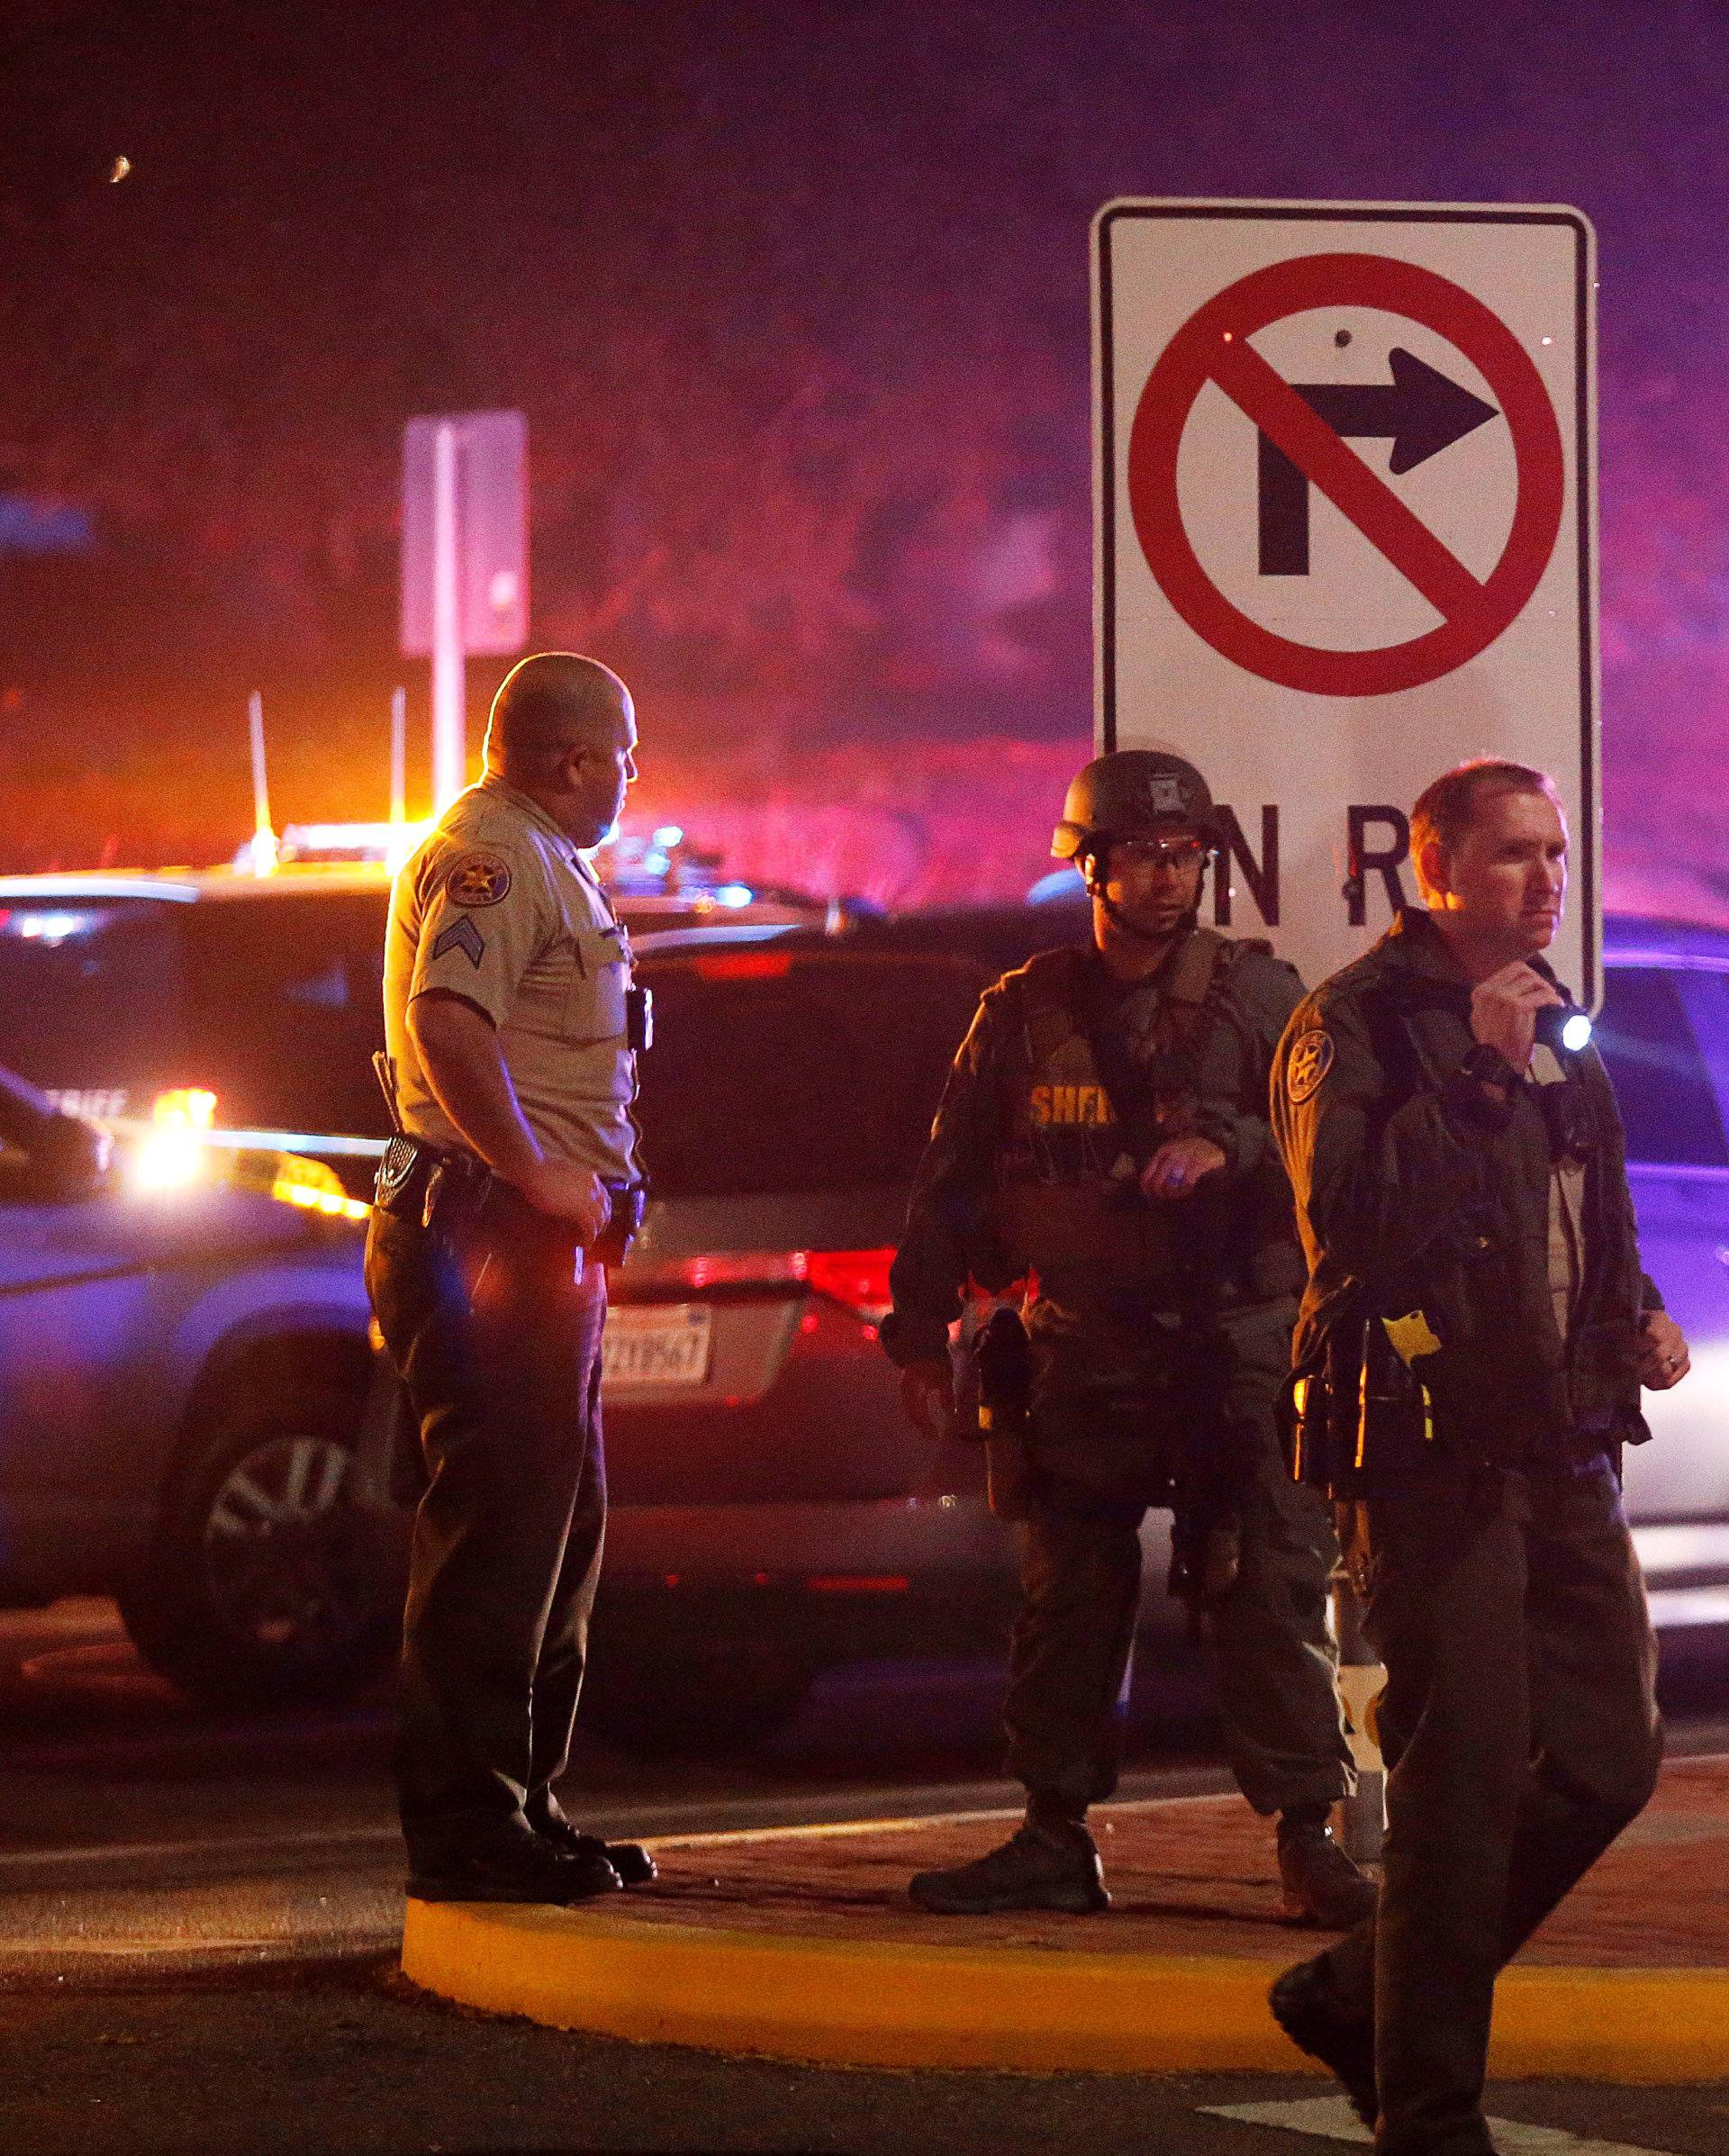 Police guard the site of a mass shooting at a bar in Thousand Oaks